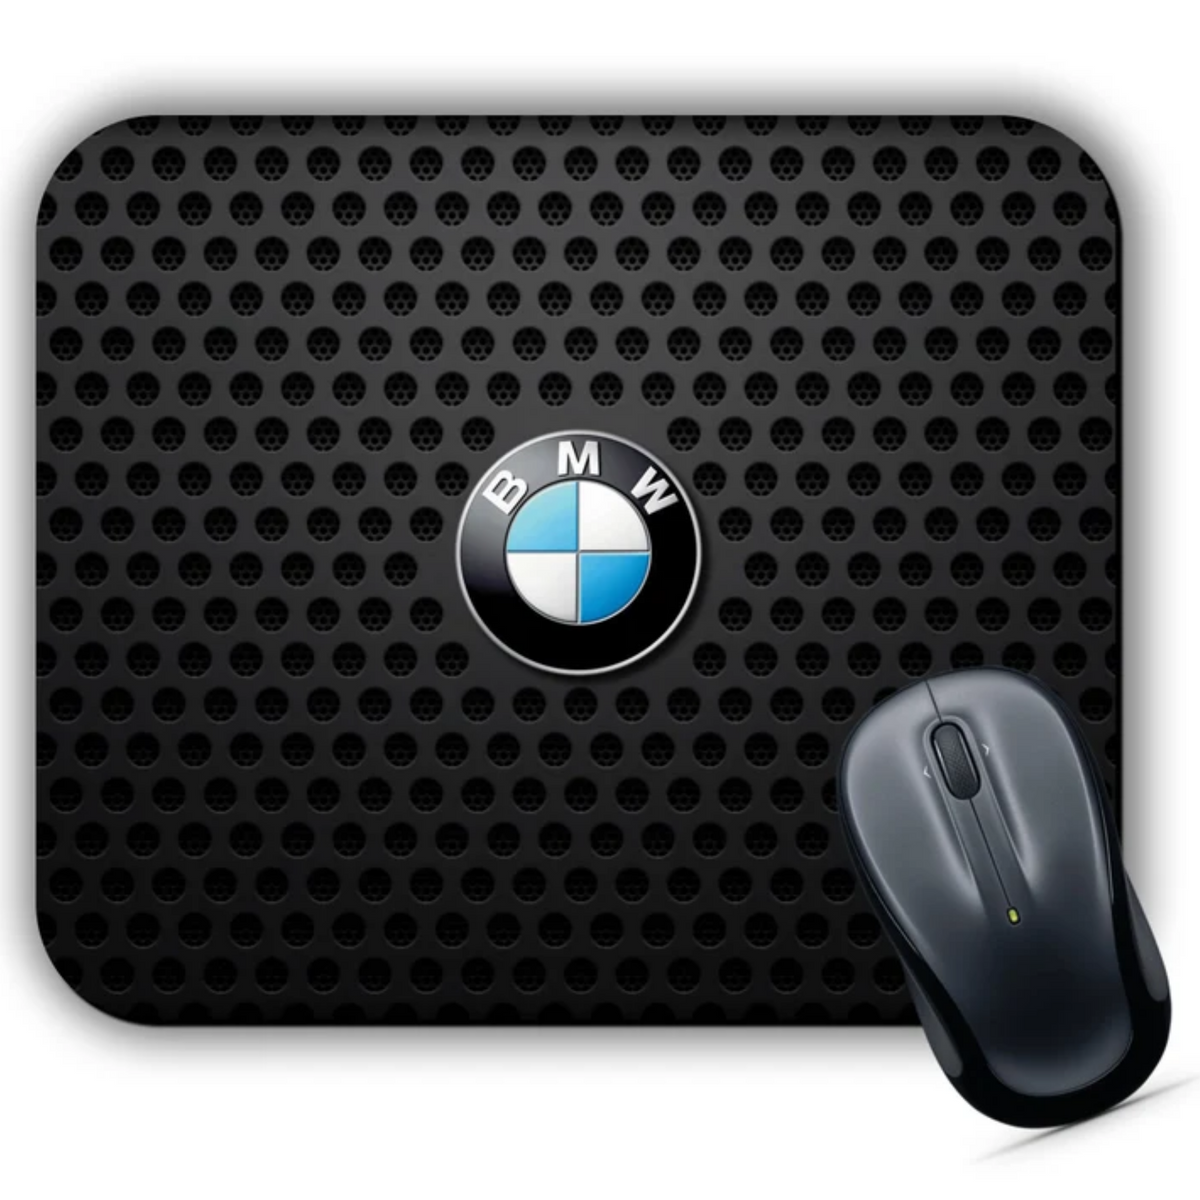 MOUSE PAD BMW